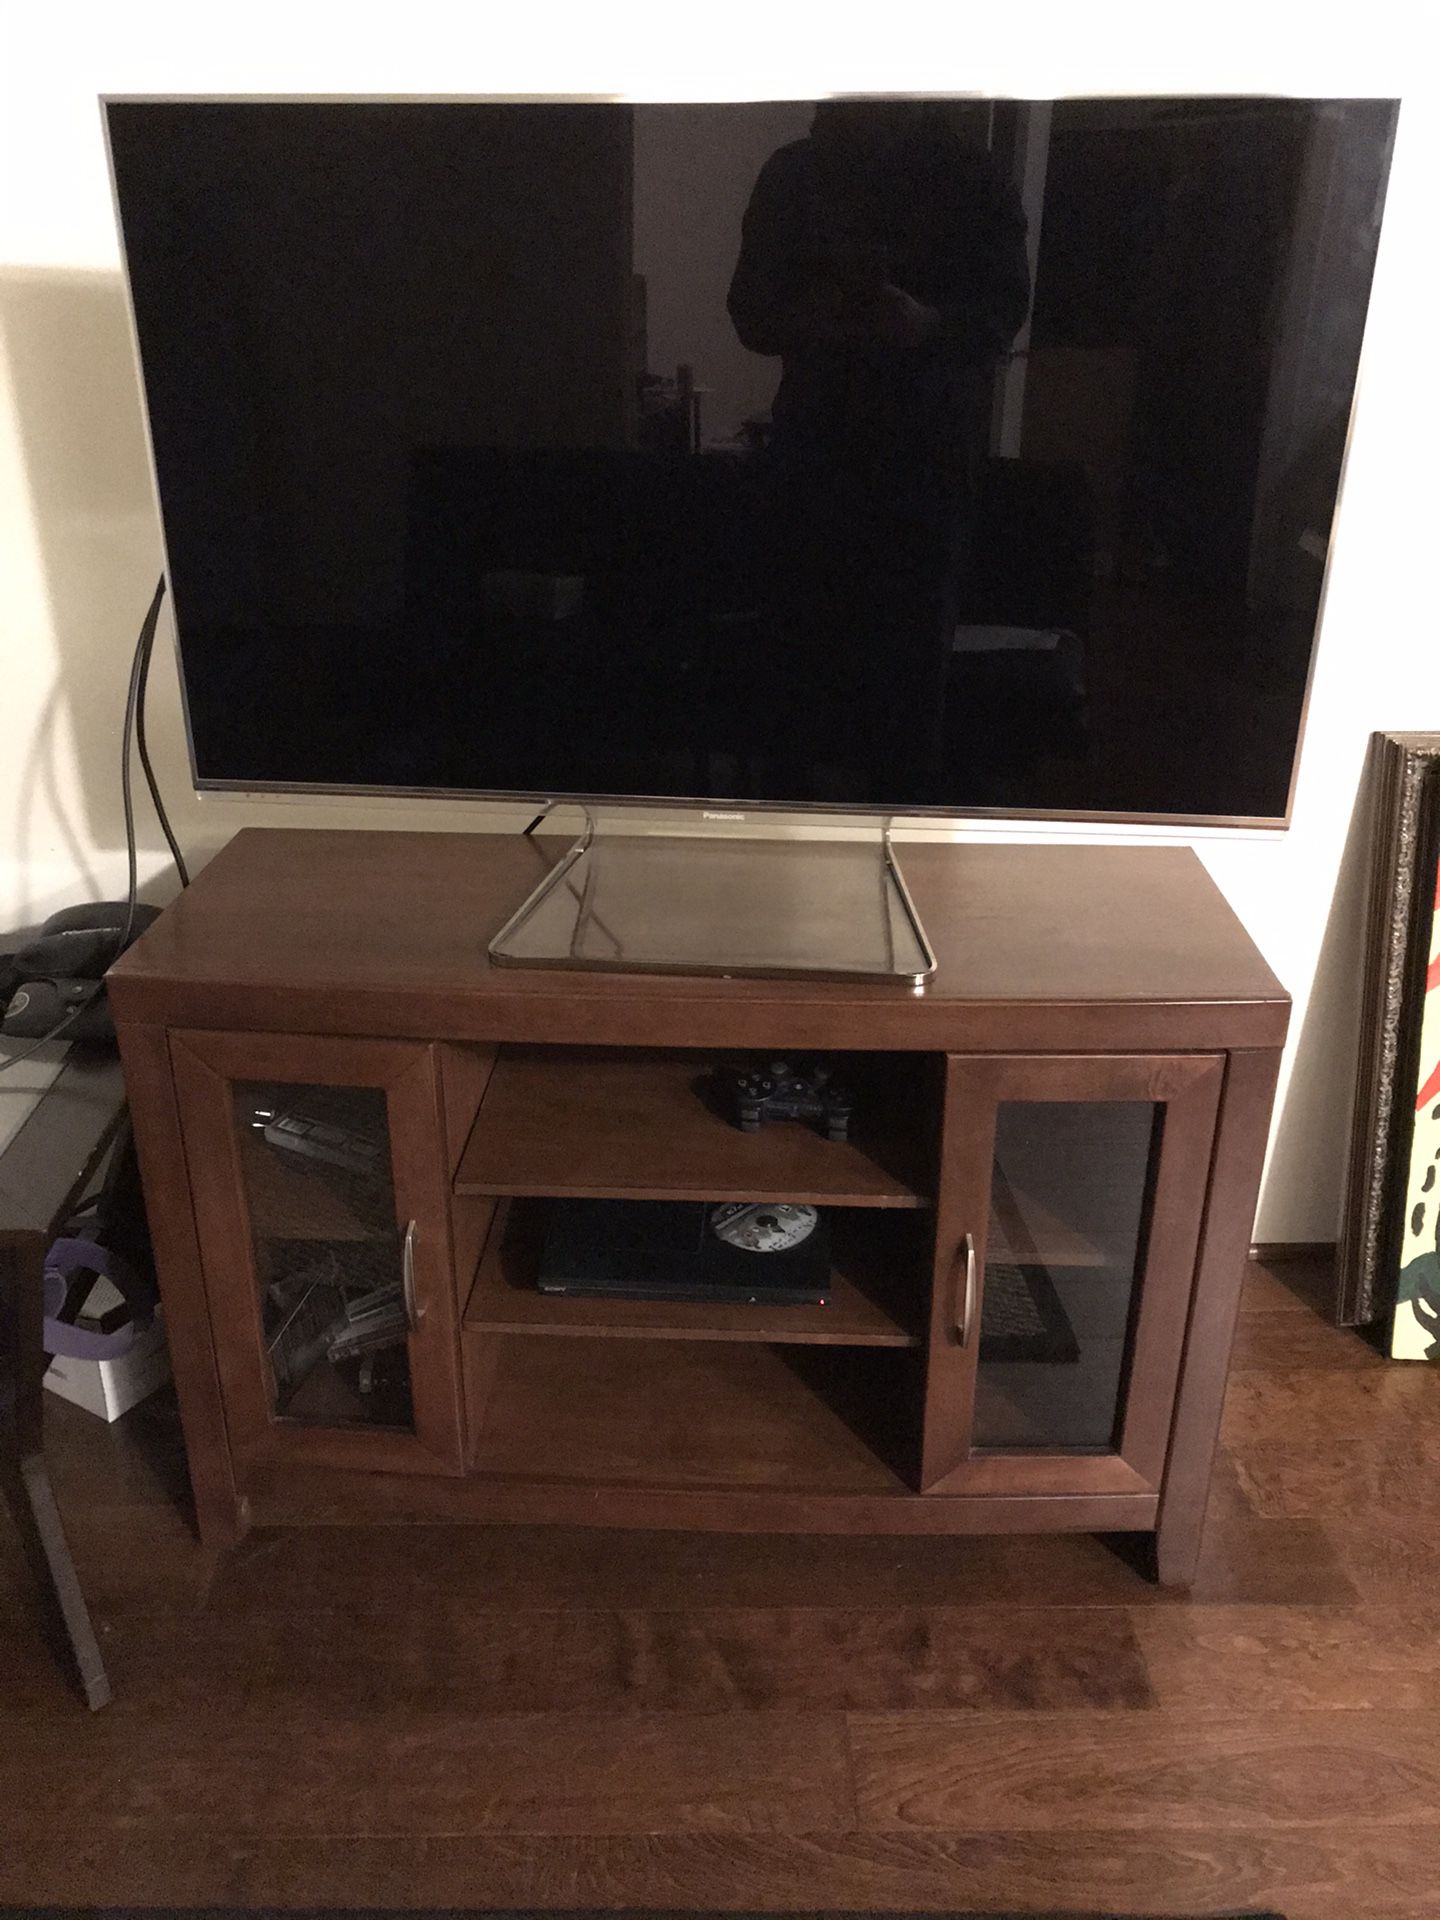 CHEAP TV Stand